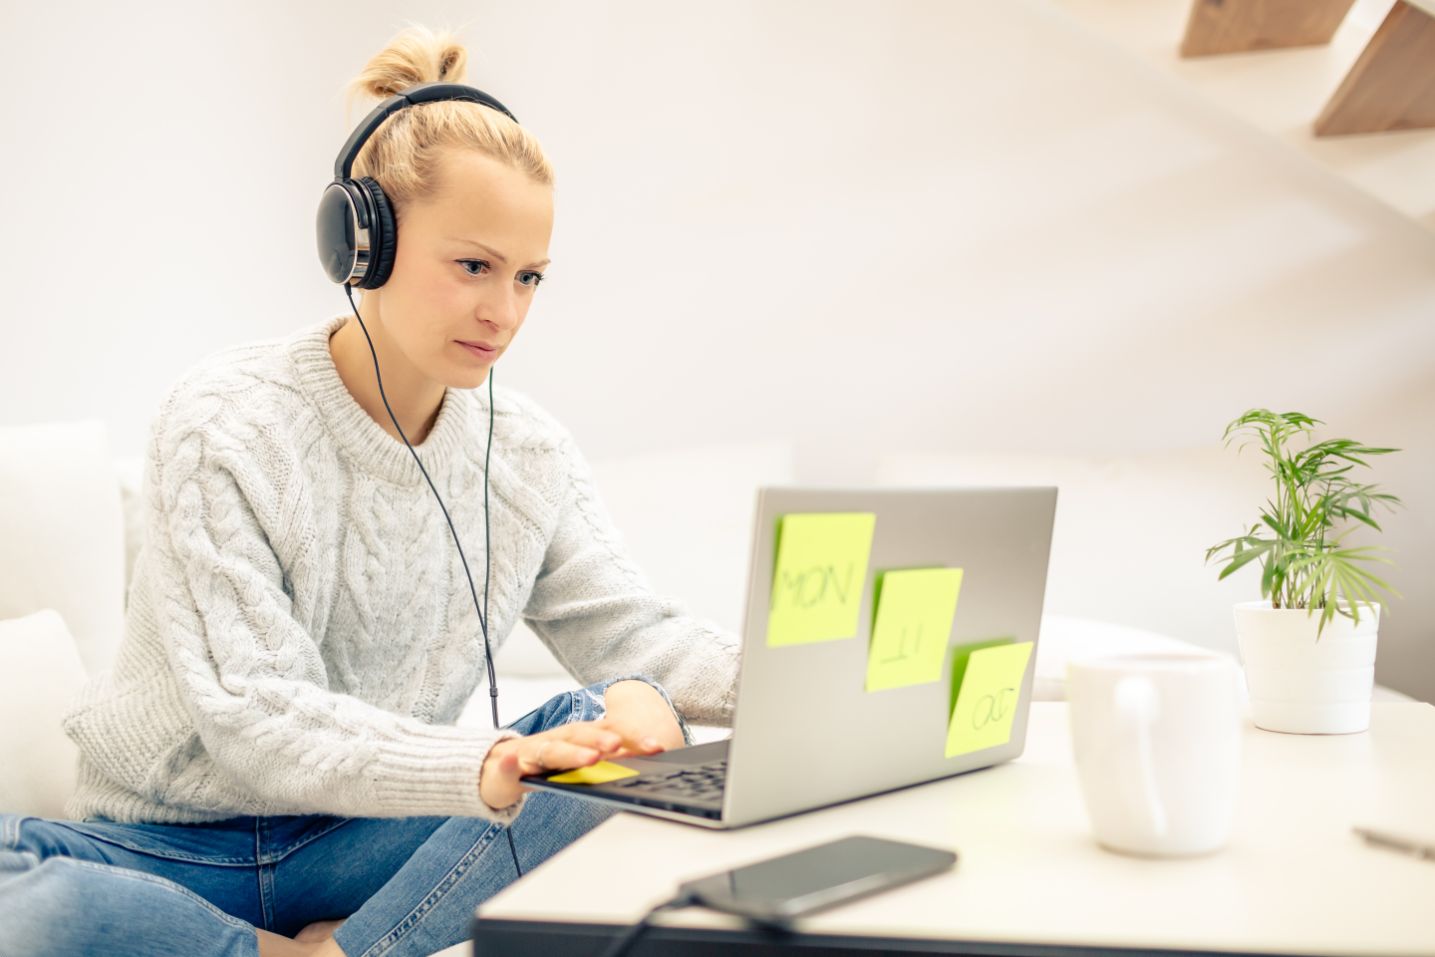 How Music Affects Your Work Productivity